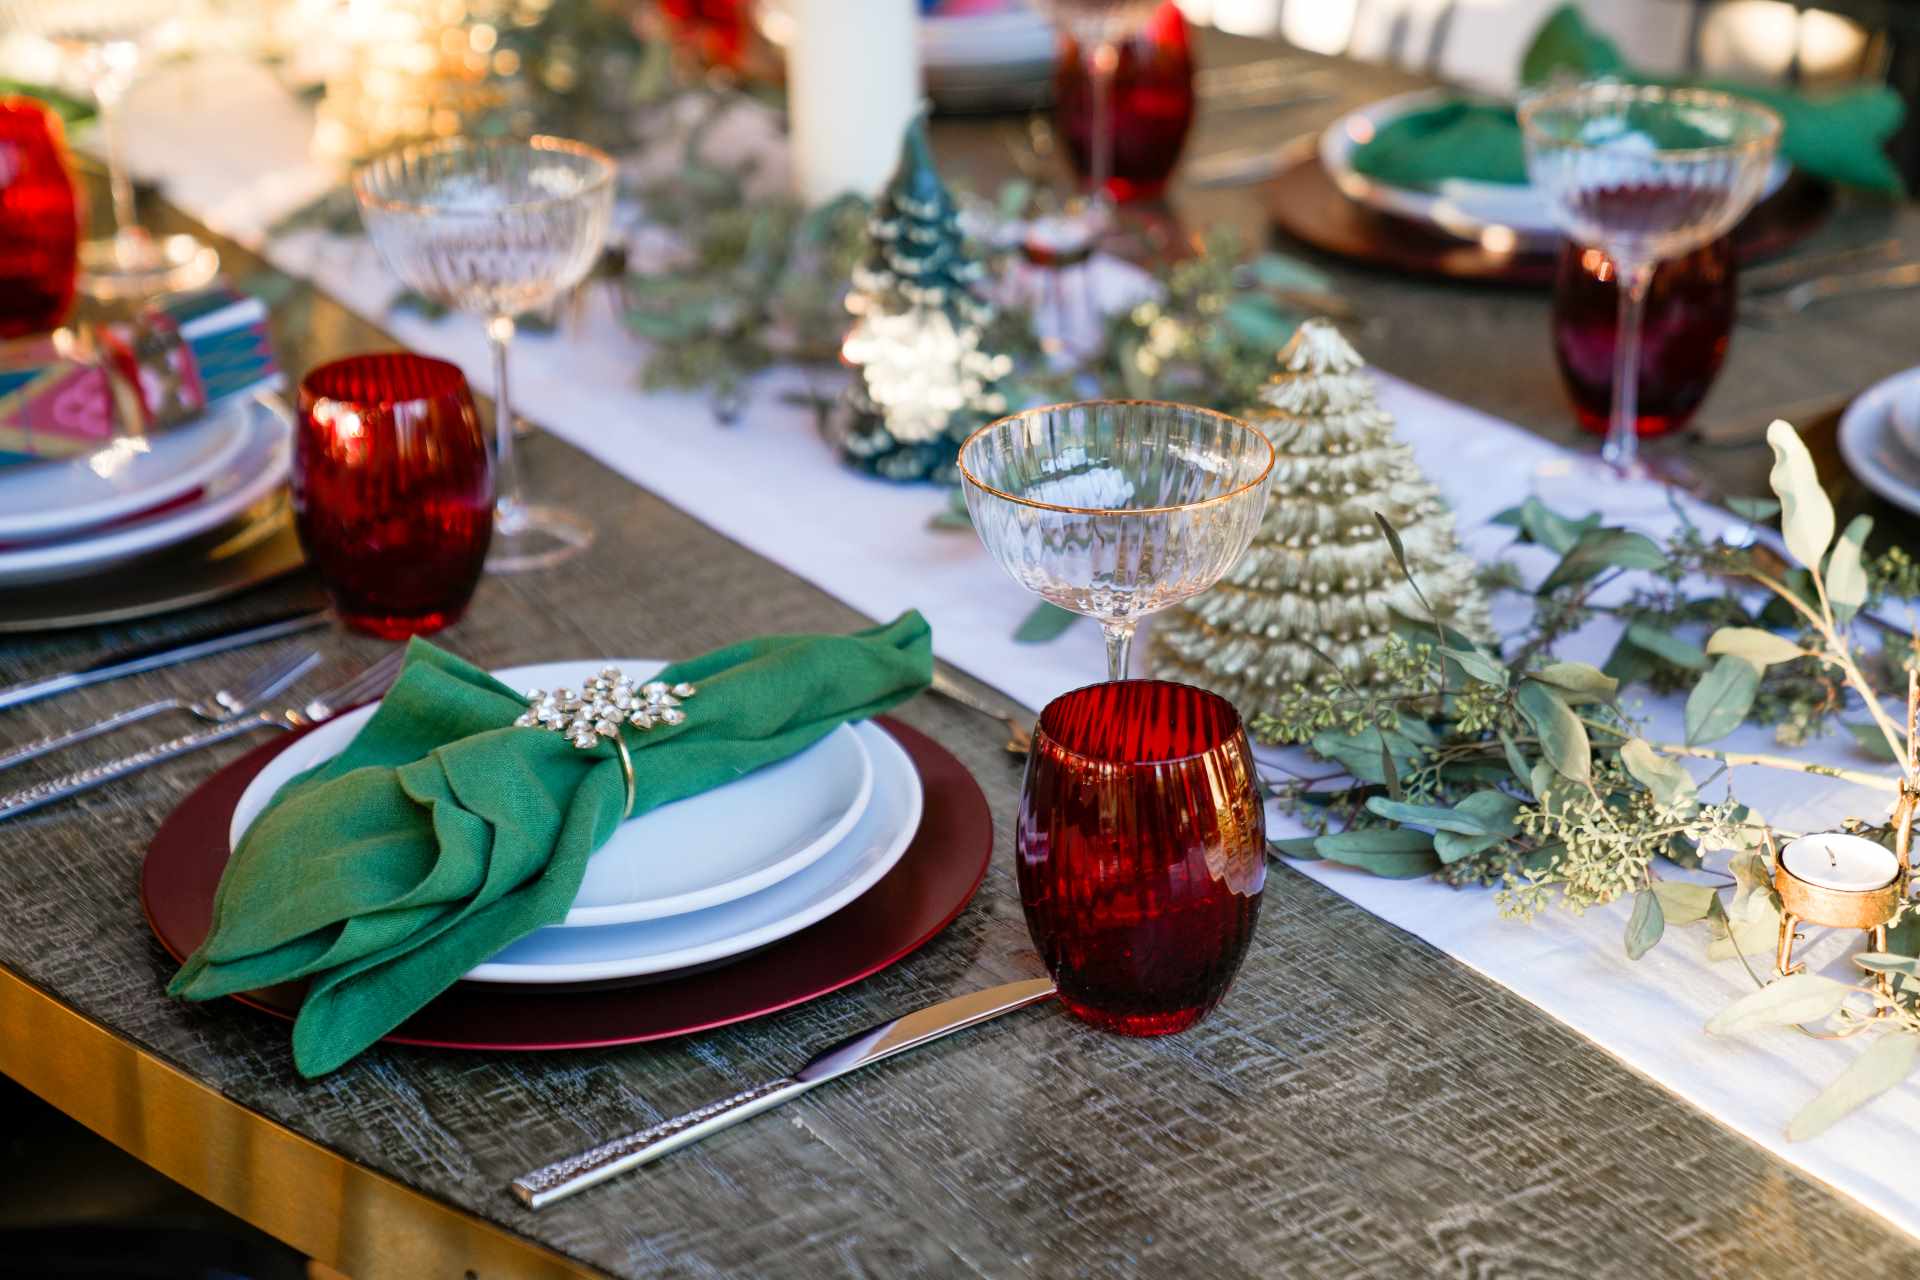 11 Christmas Dinner Traditions From Around the World (+11 Inspired Recipes to Try!)